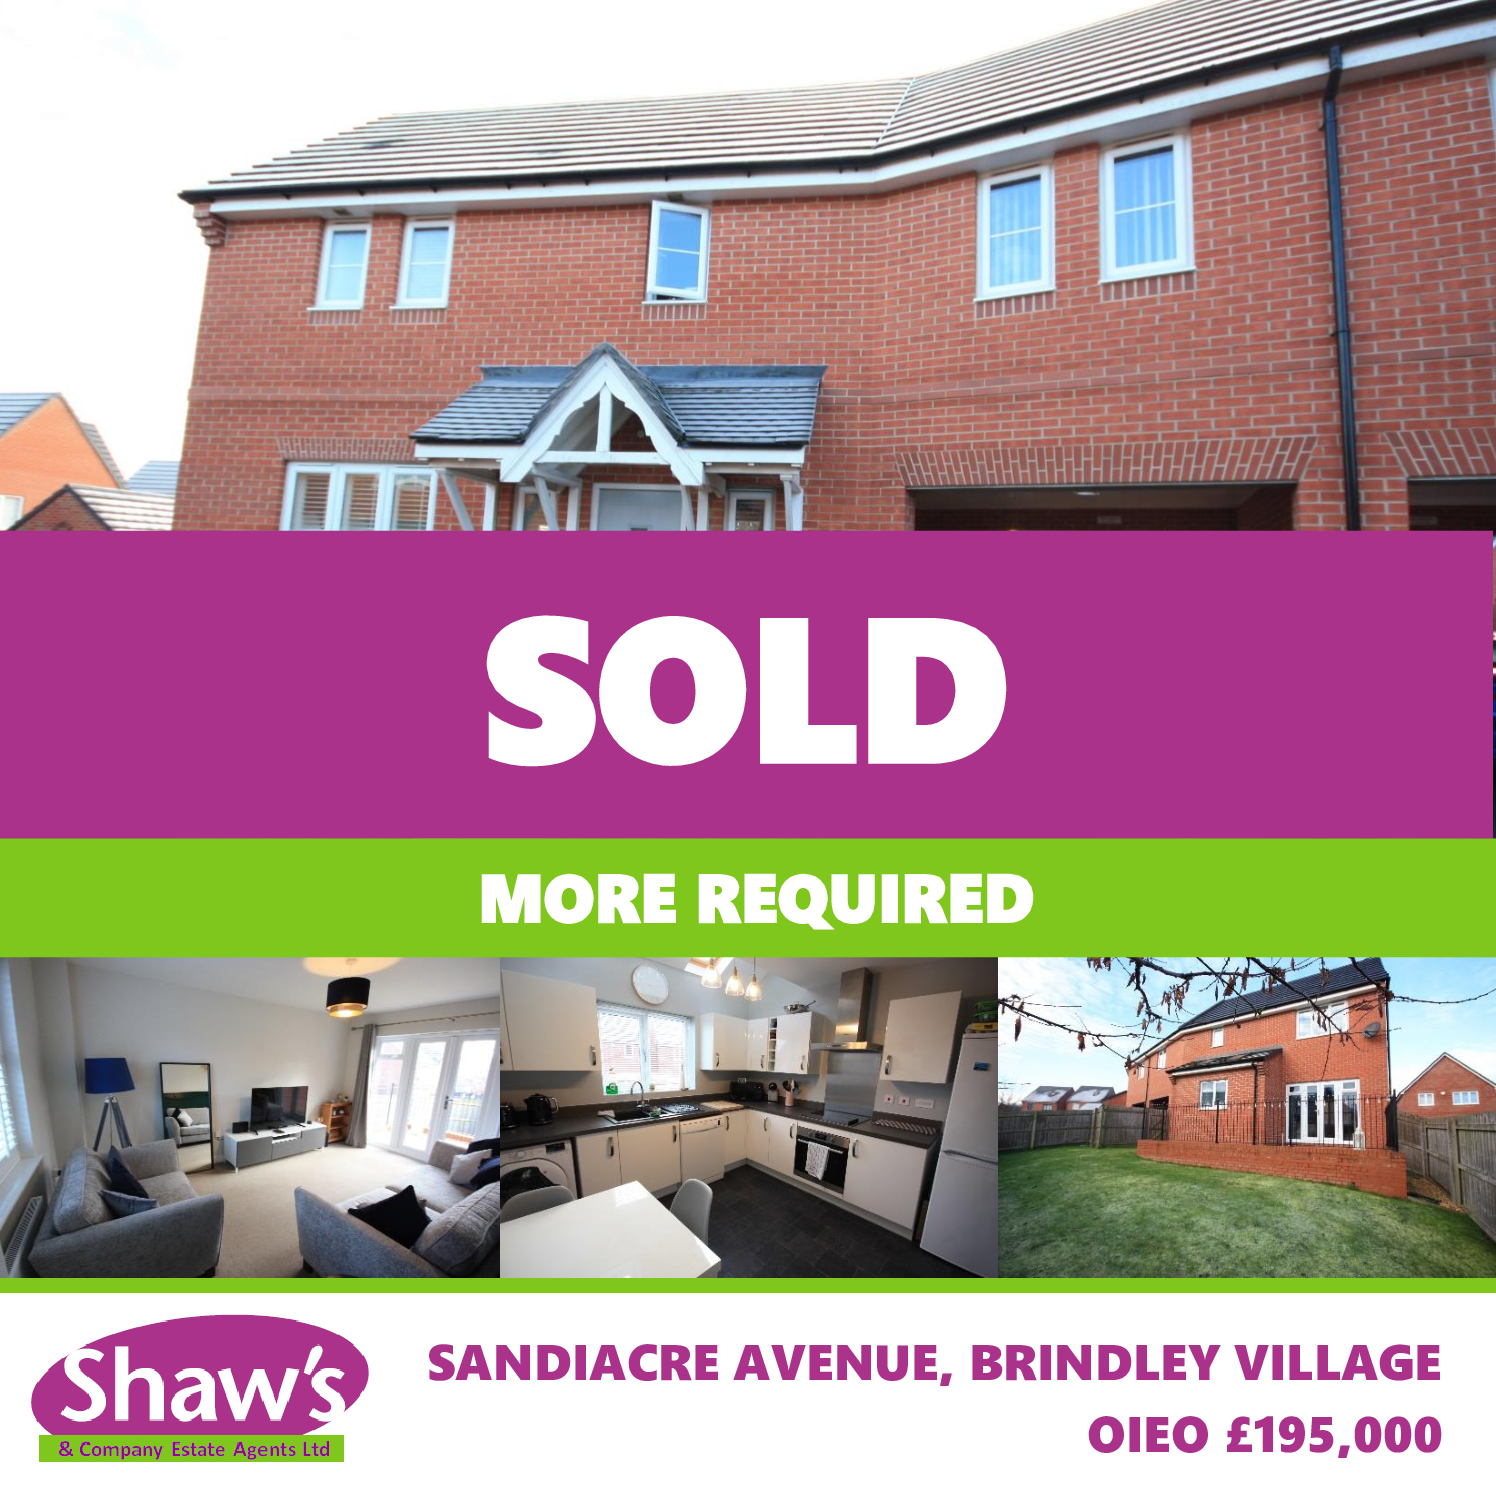 *** SOLD SOLD SOLD! ***